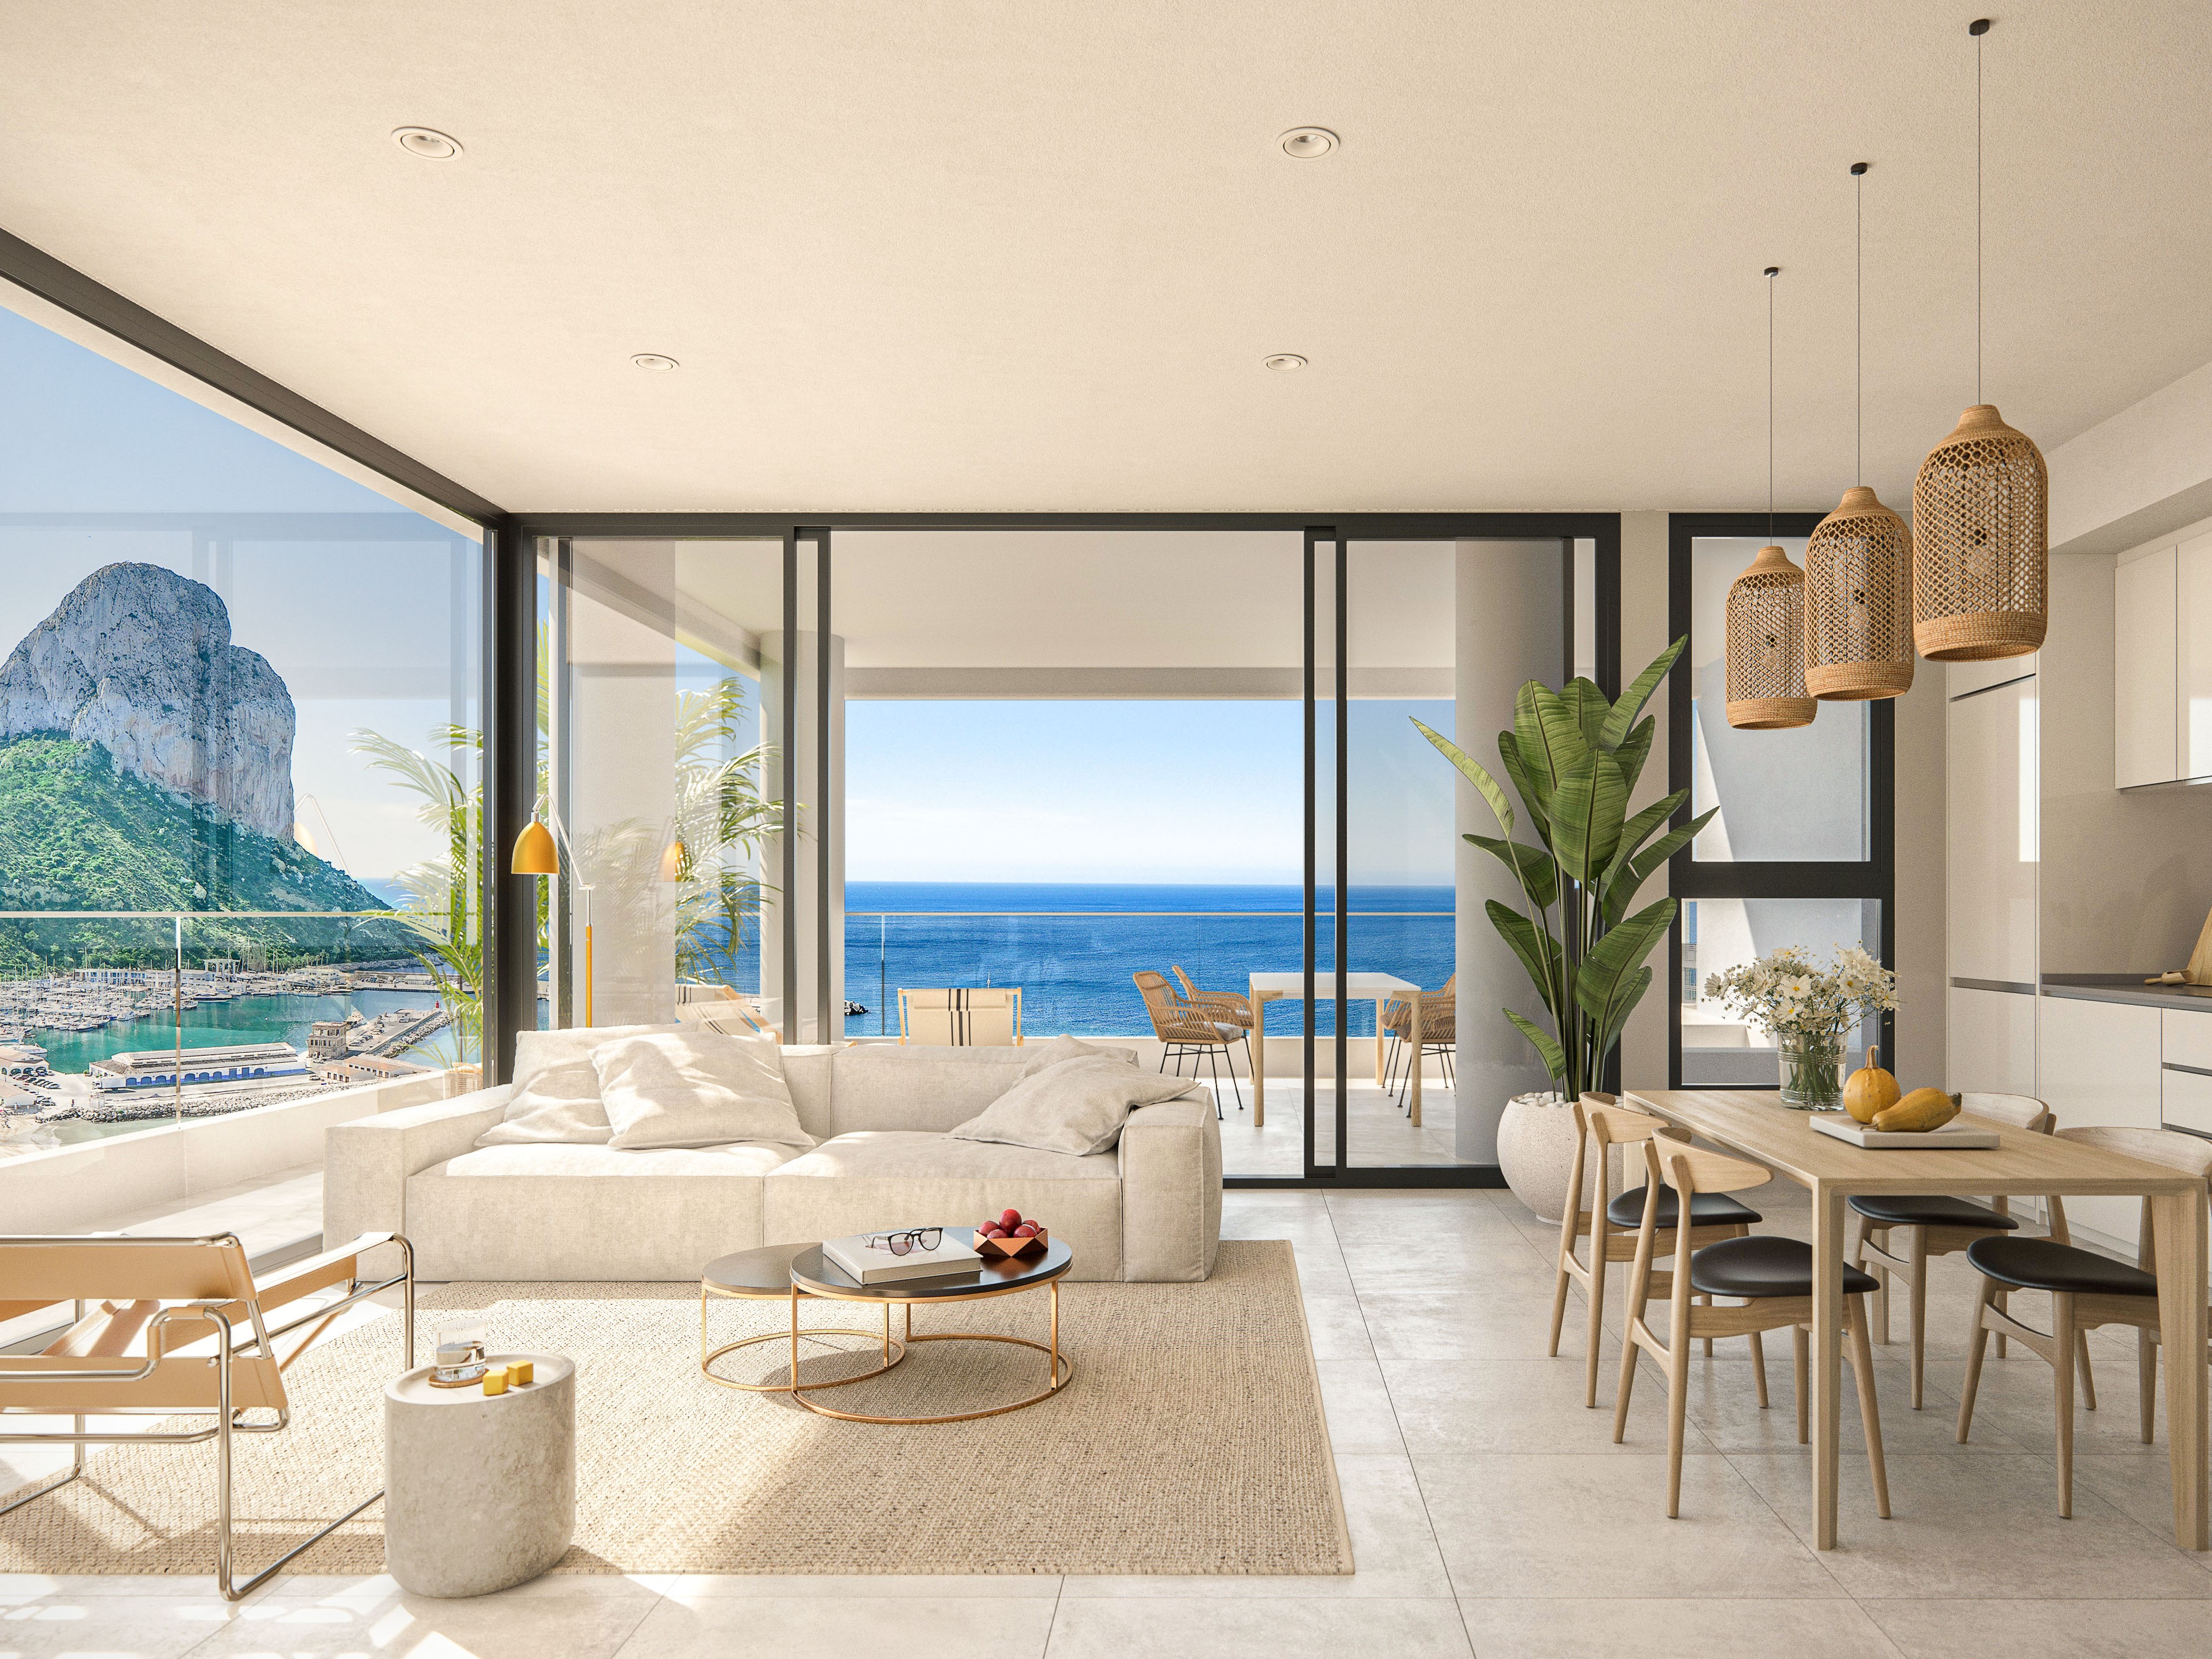 New build modern apartments with sea views in Calpe. Units with 1, 2 or 3 bedrooms. Ideal location.